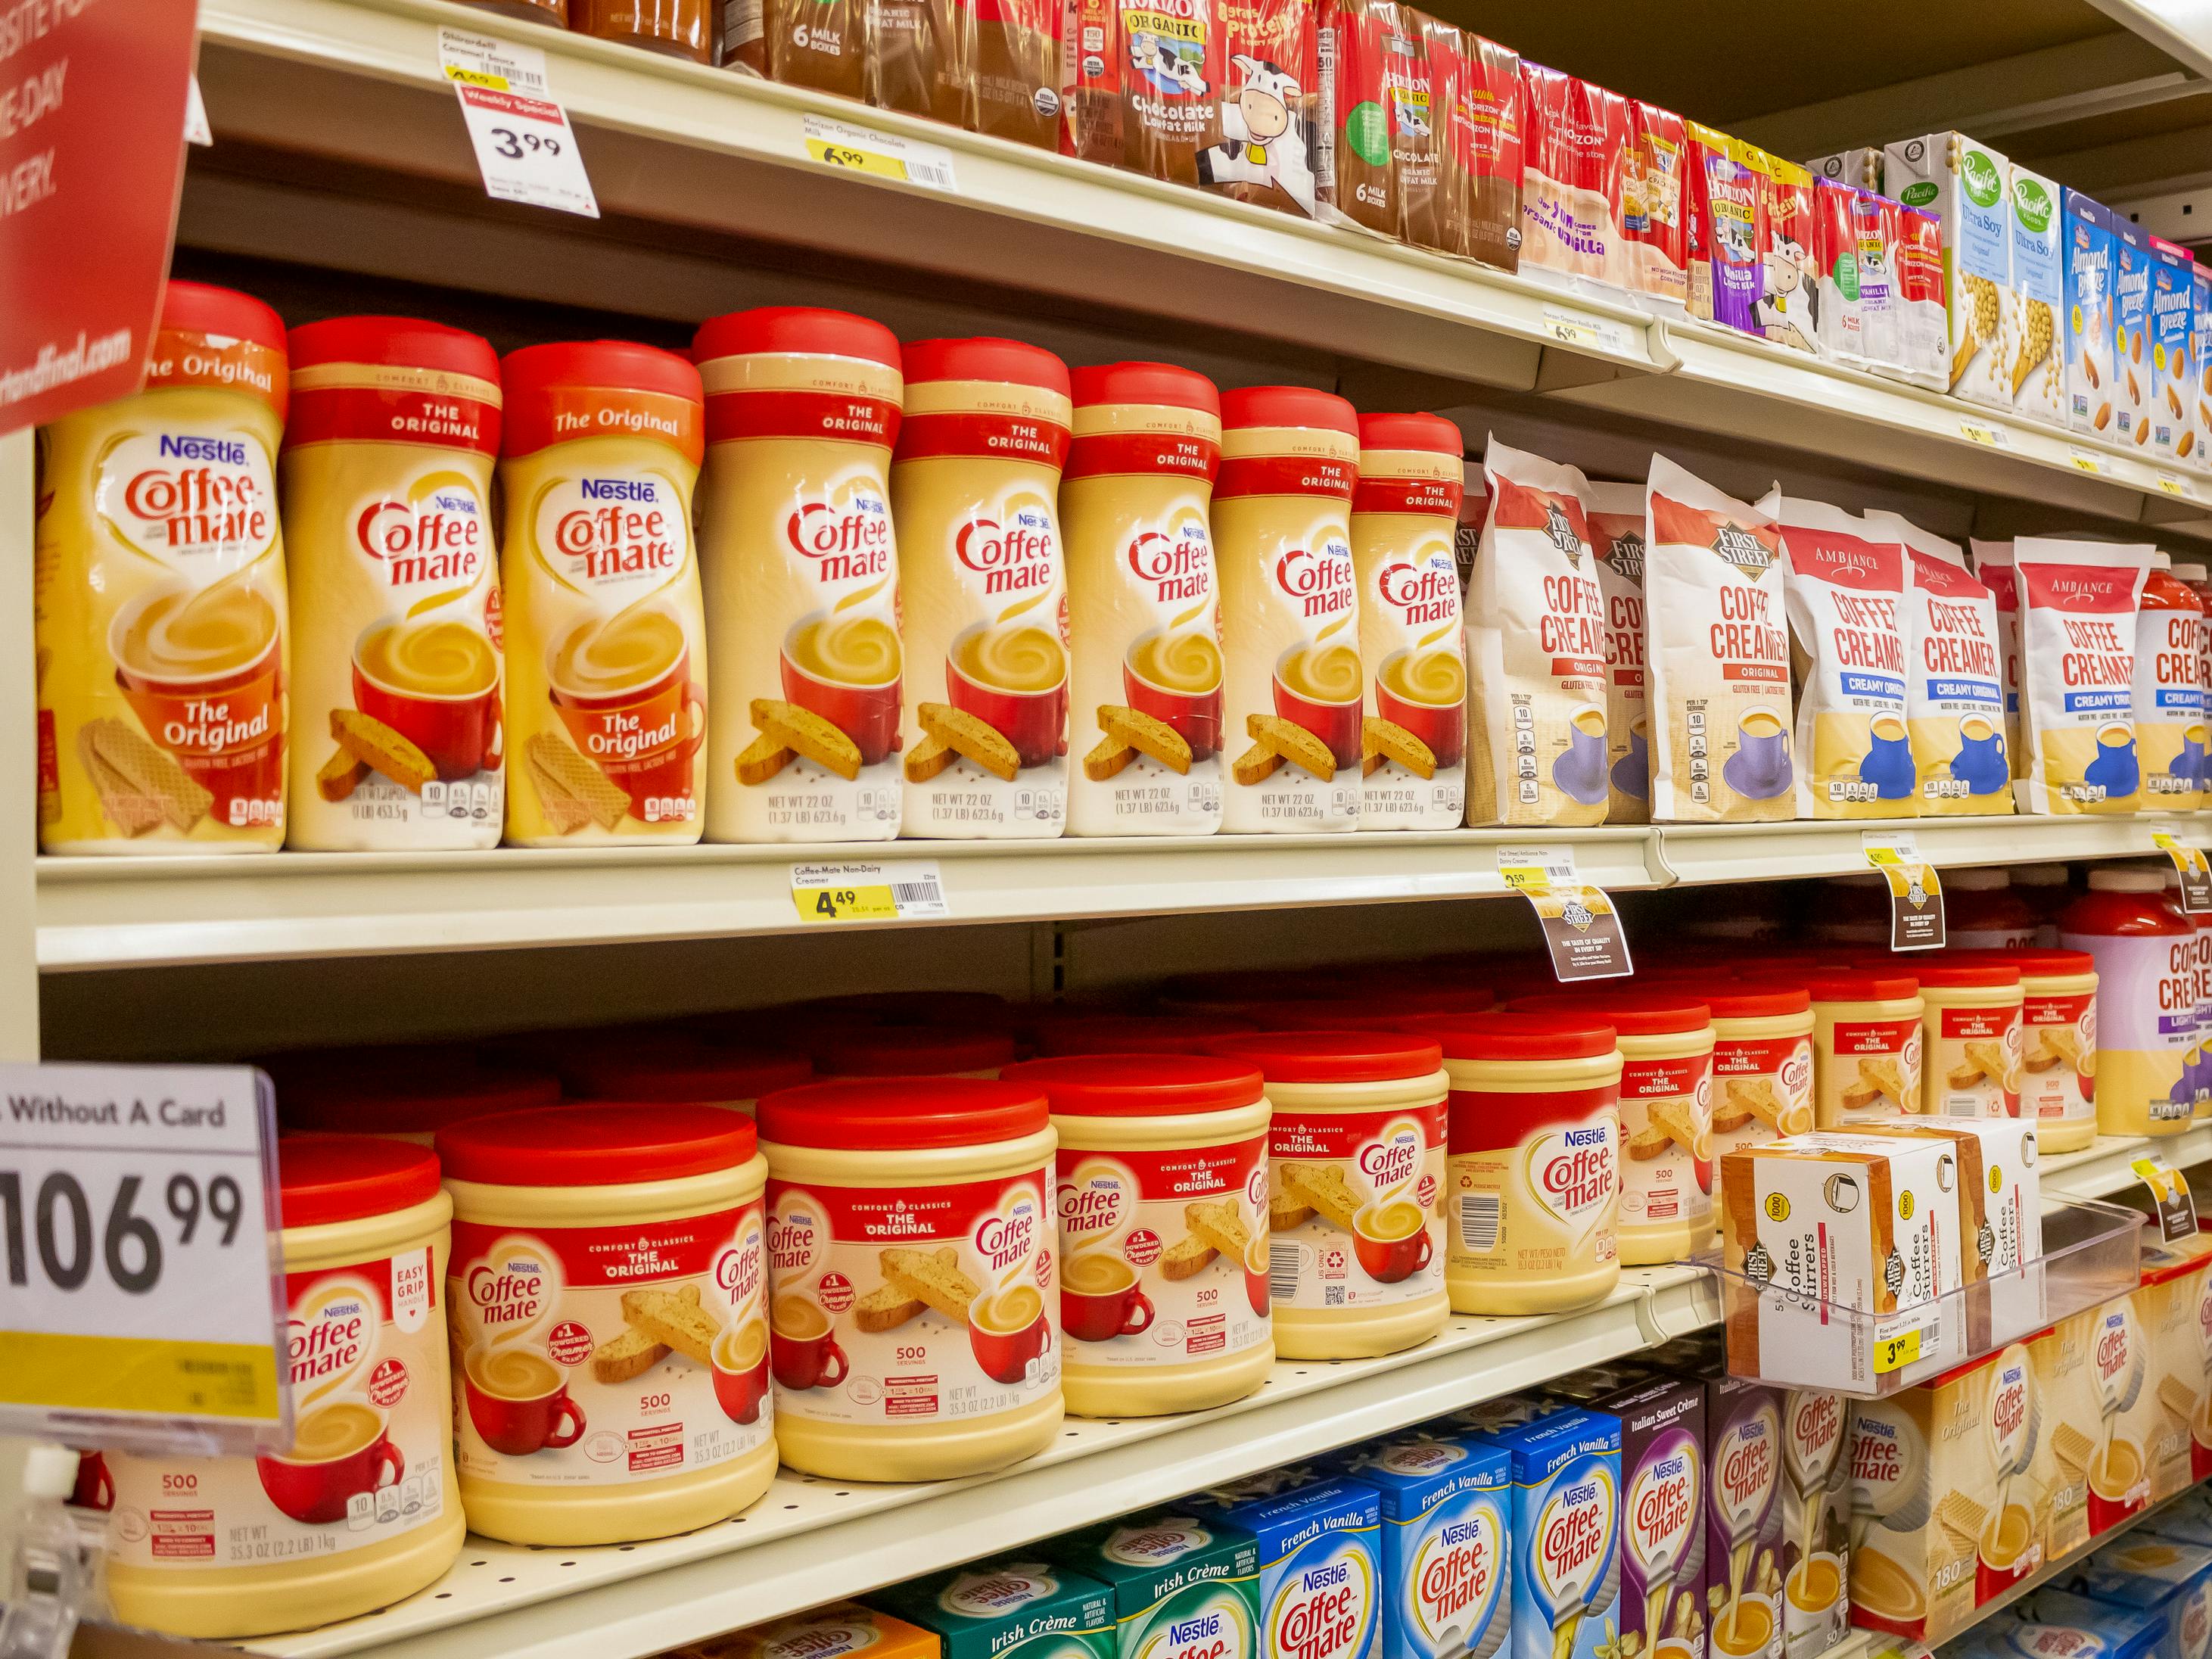 Shelves of Coffee Mate powder creamers in a store